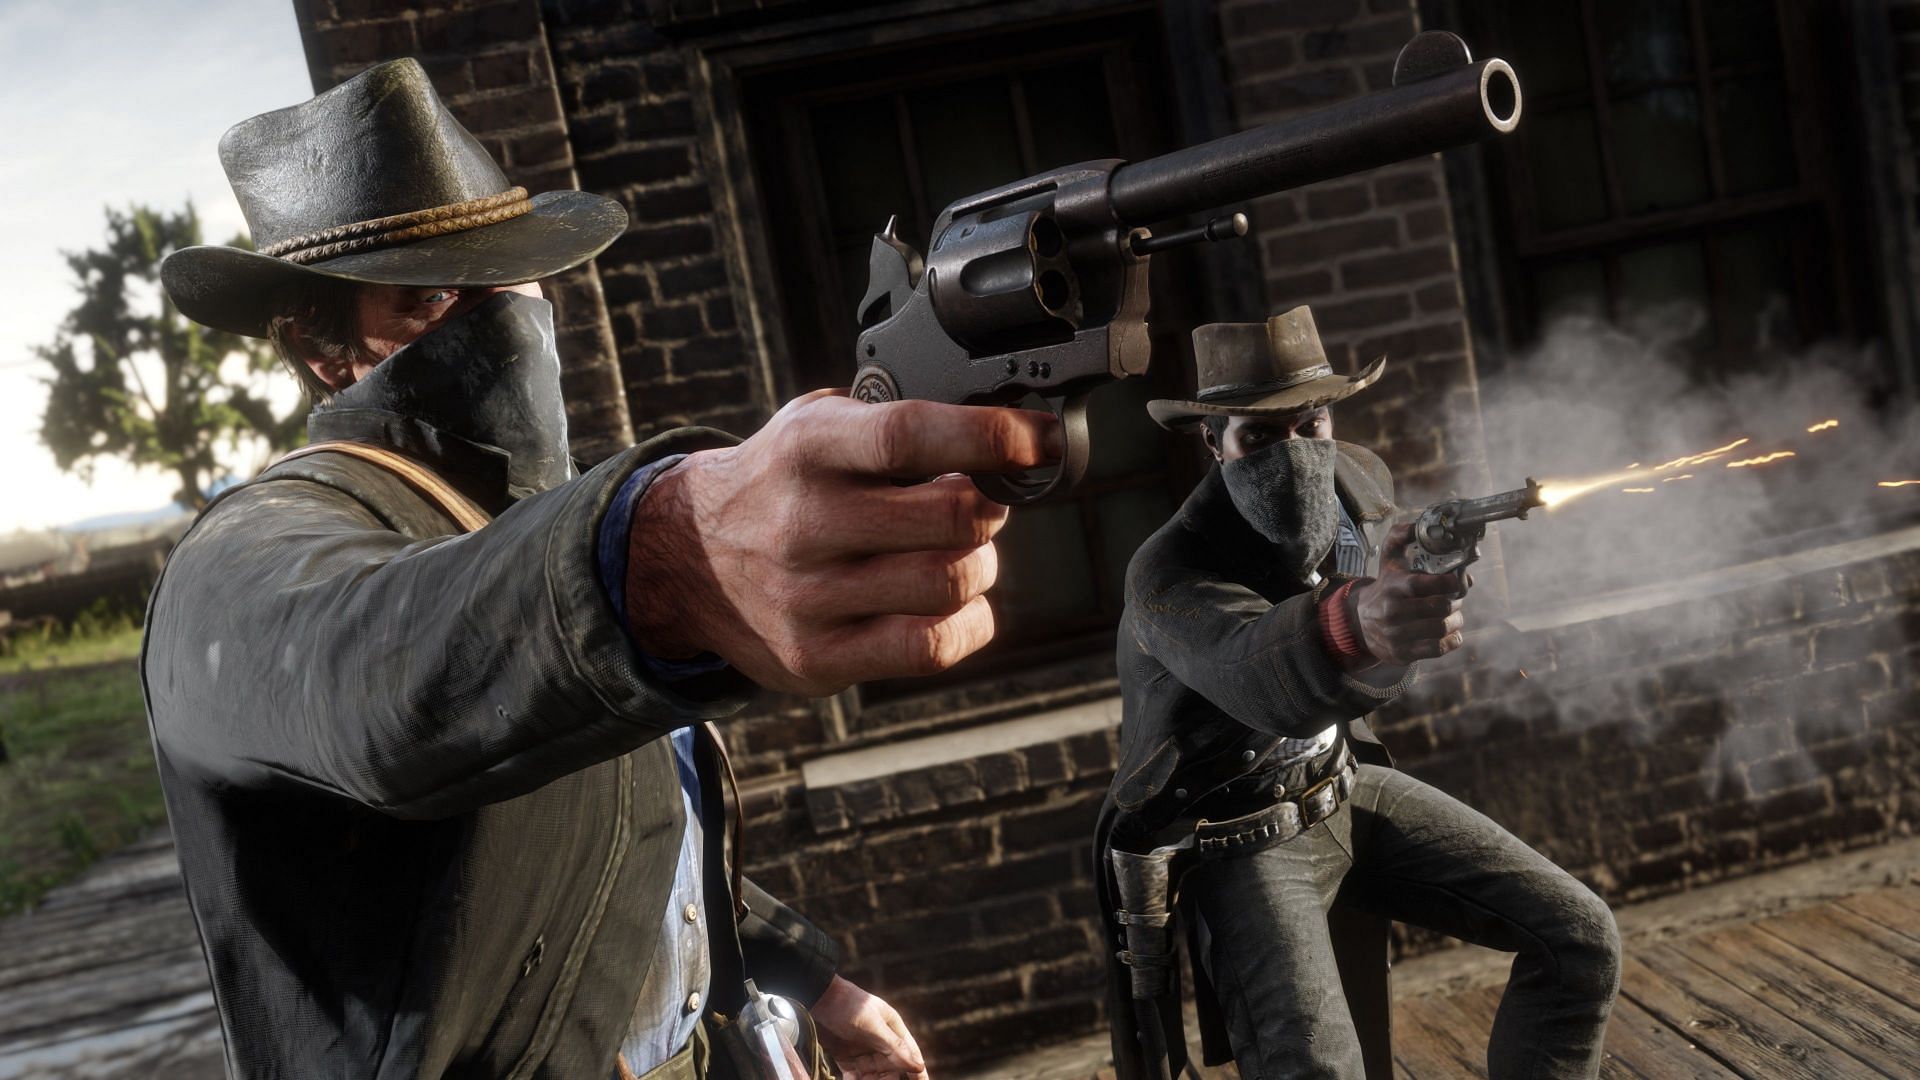 Red Dead Redemption PS5 Release Date: Is an RDR2 Remake Coming